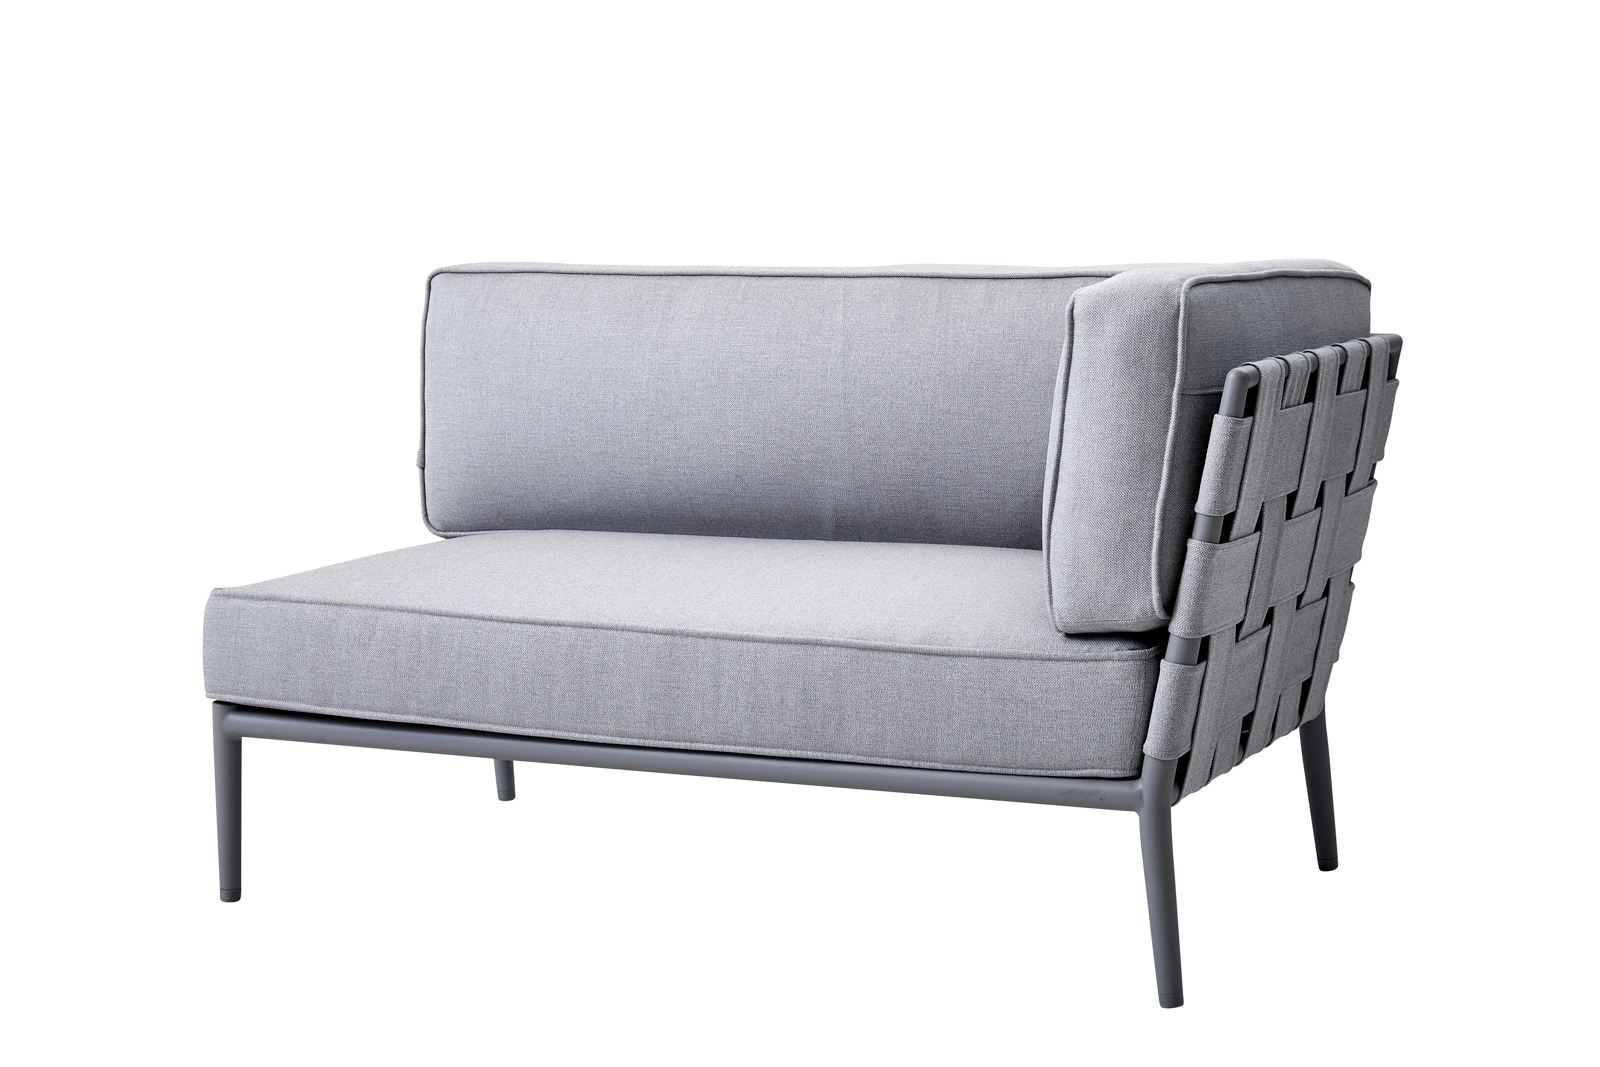 Cane-line Conic | Modulsofa, Links AirTouch | Light Grey